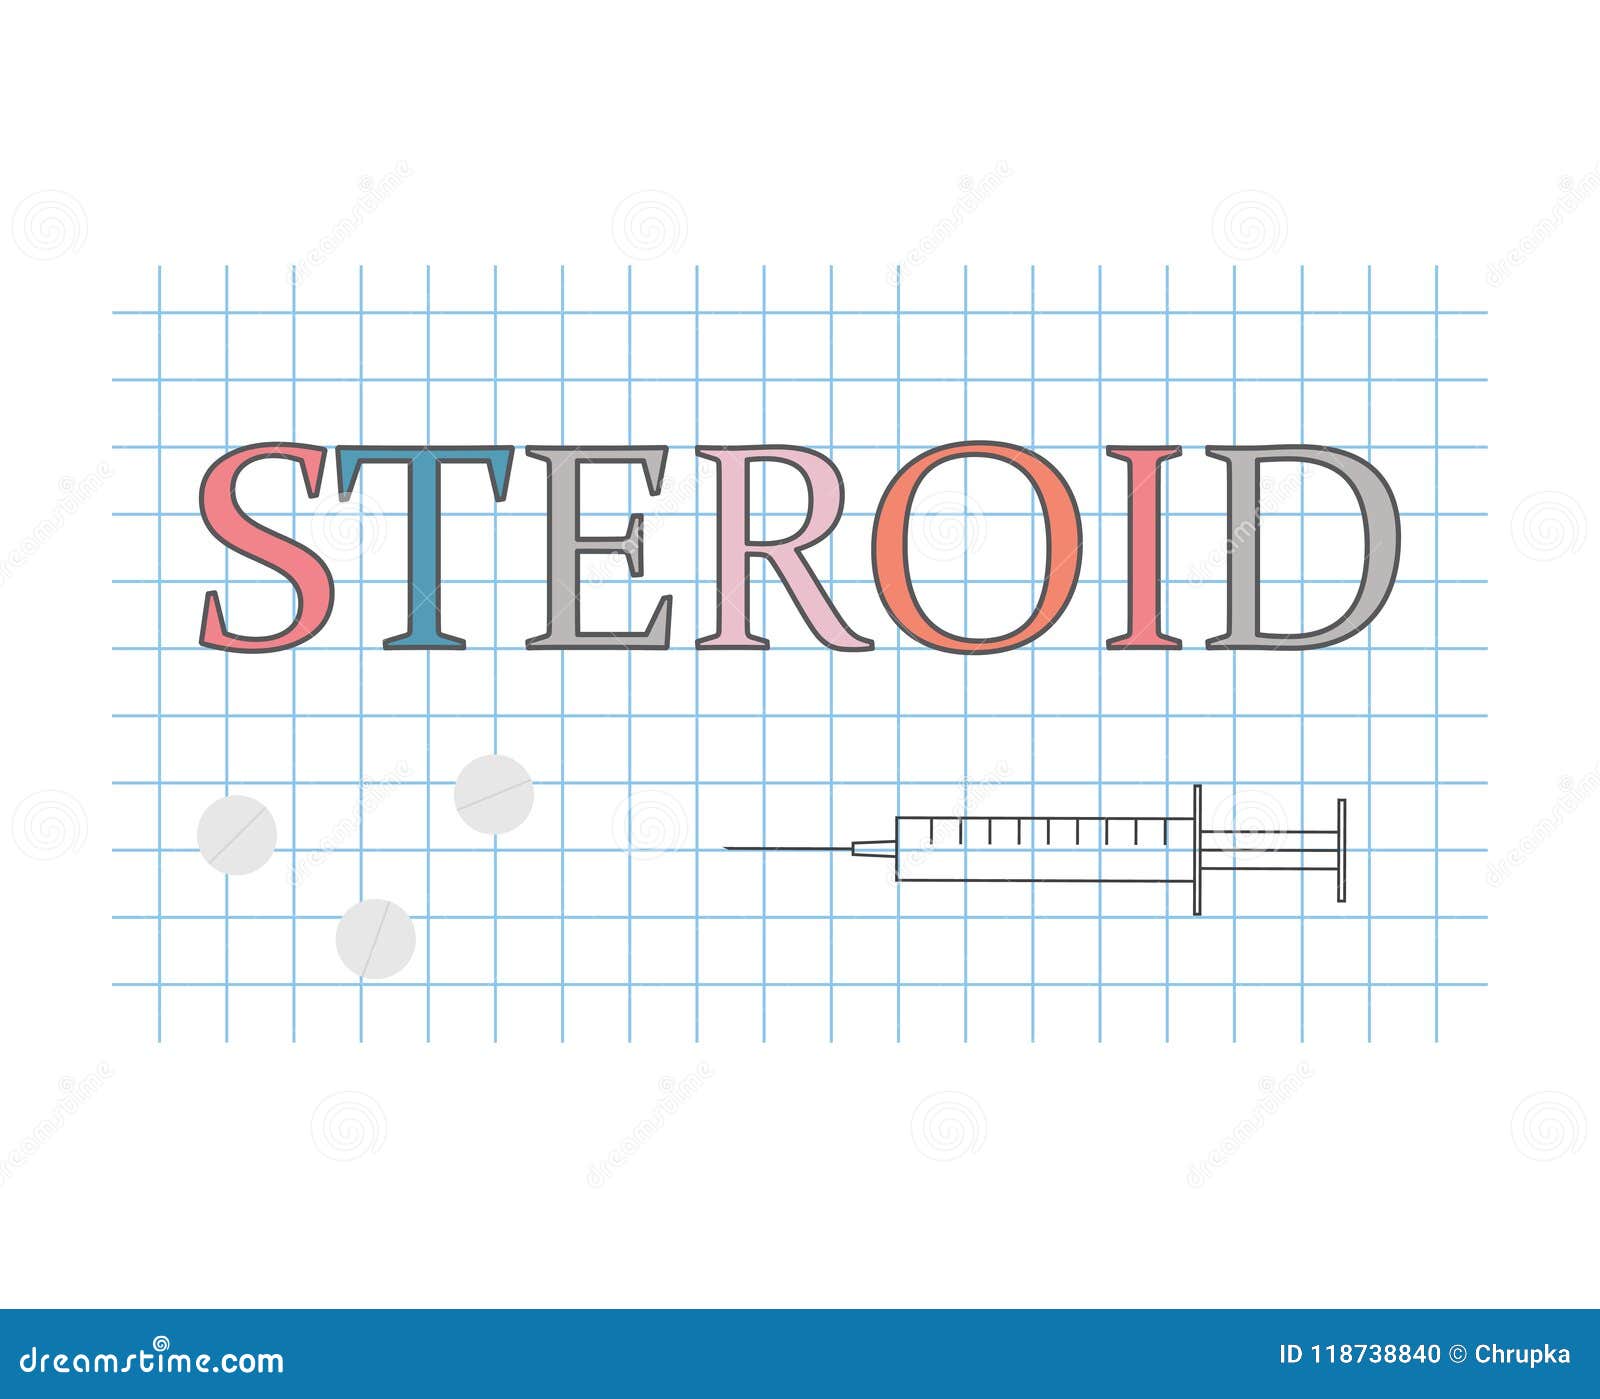 steroid research paper outline